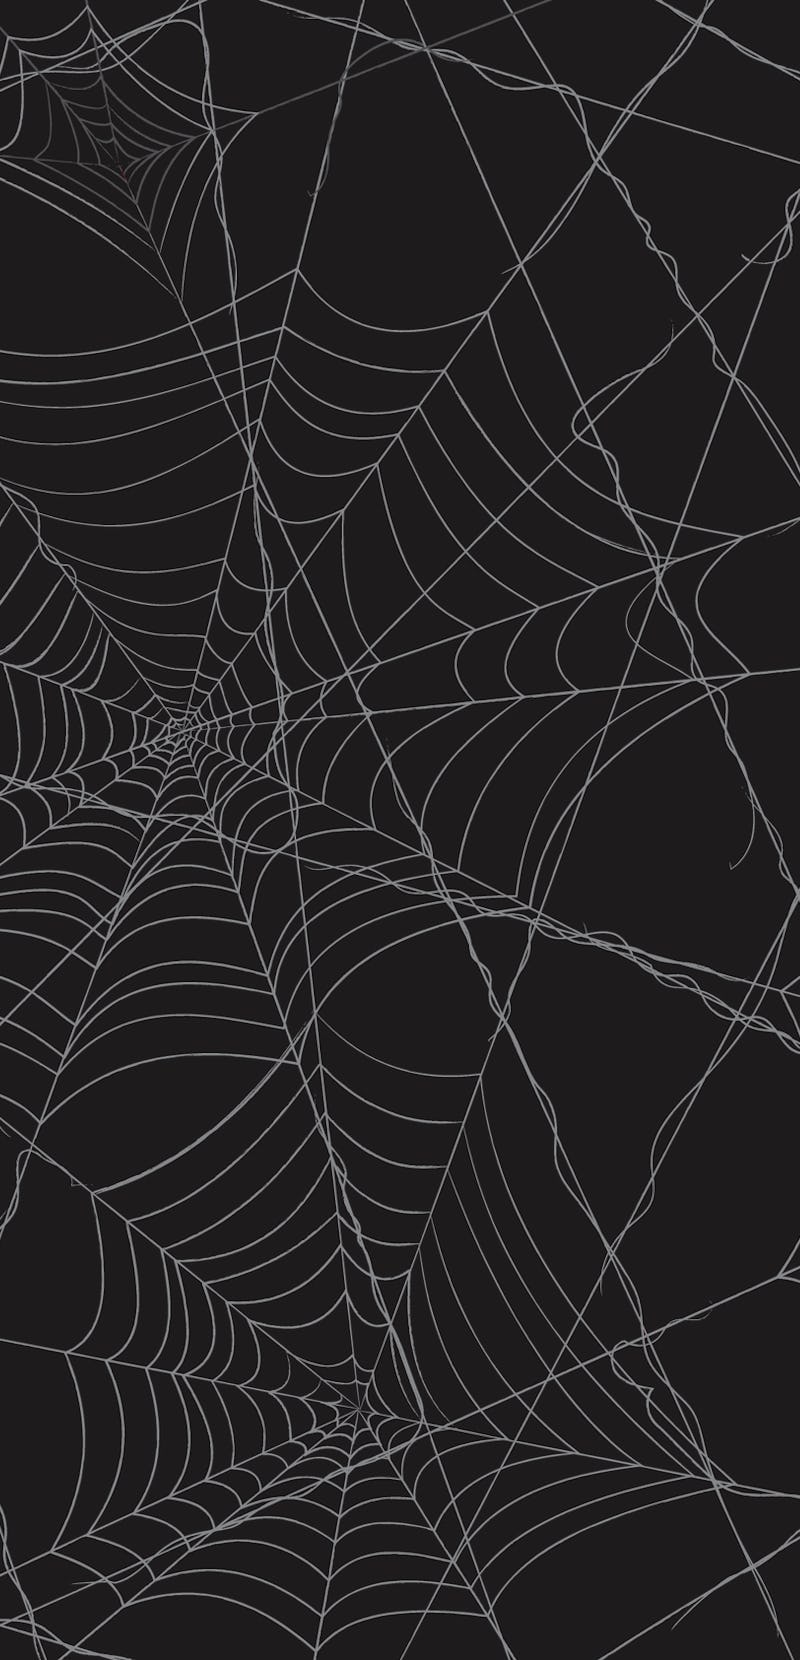 spiderweb isolated black background for halloween theme night party. cobweb vector eps10